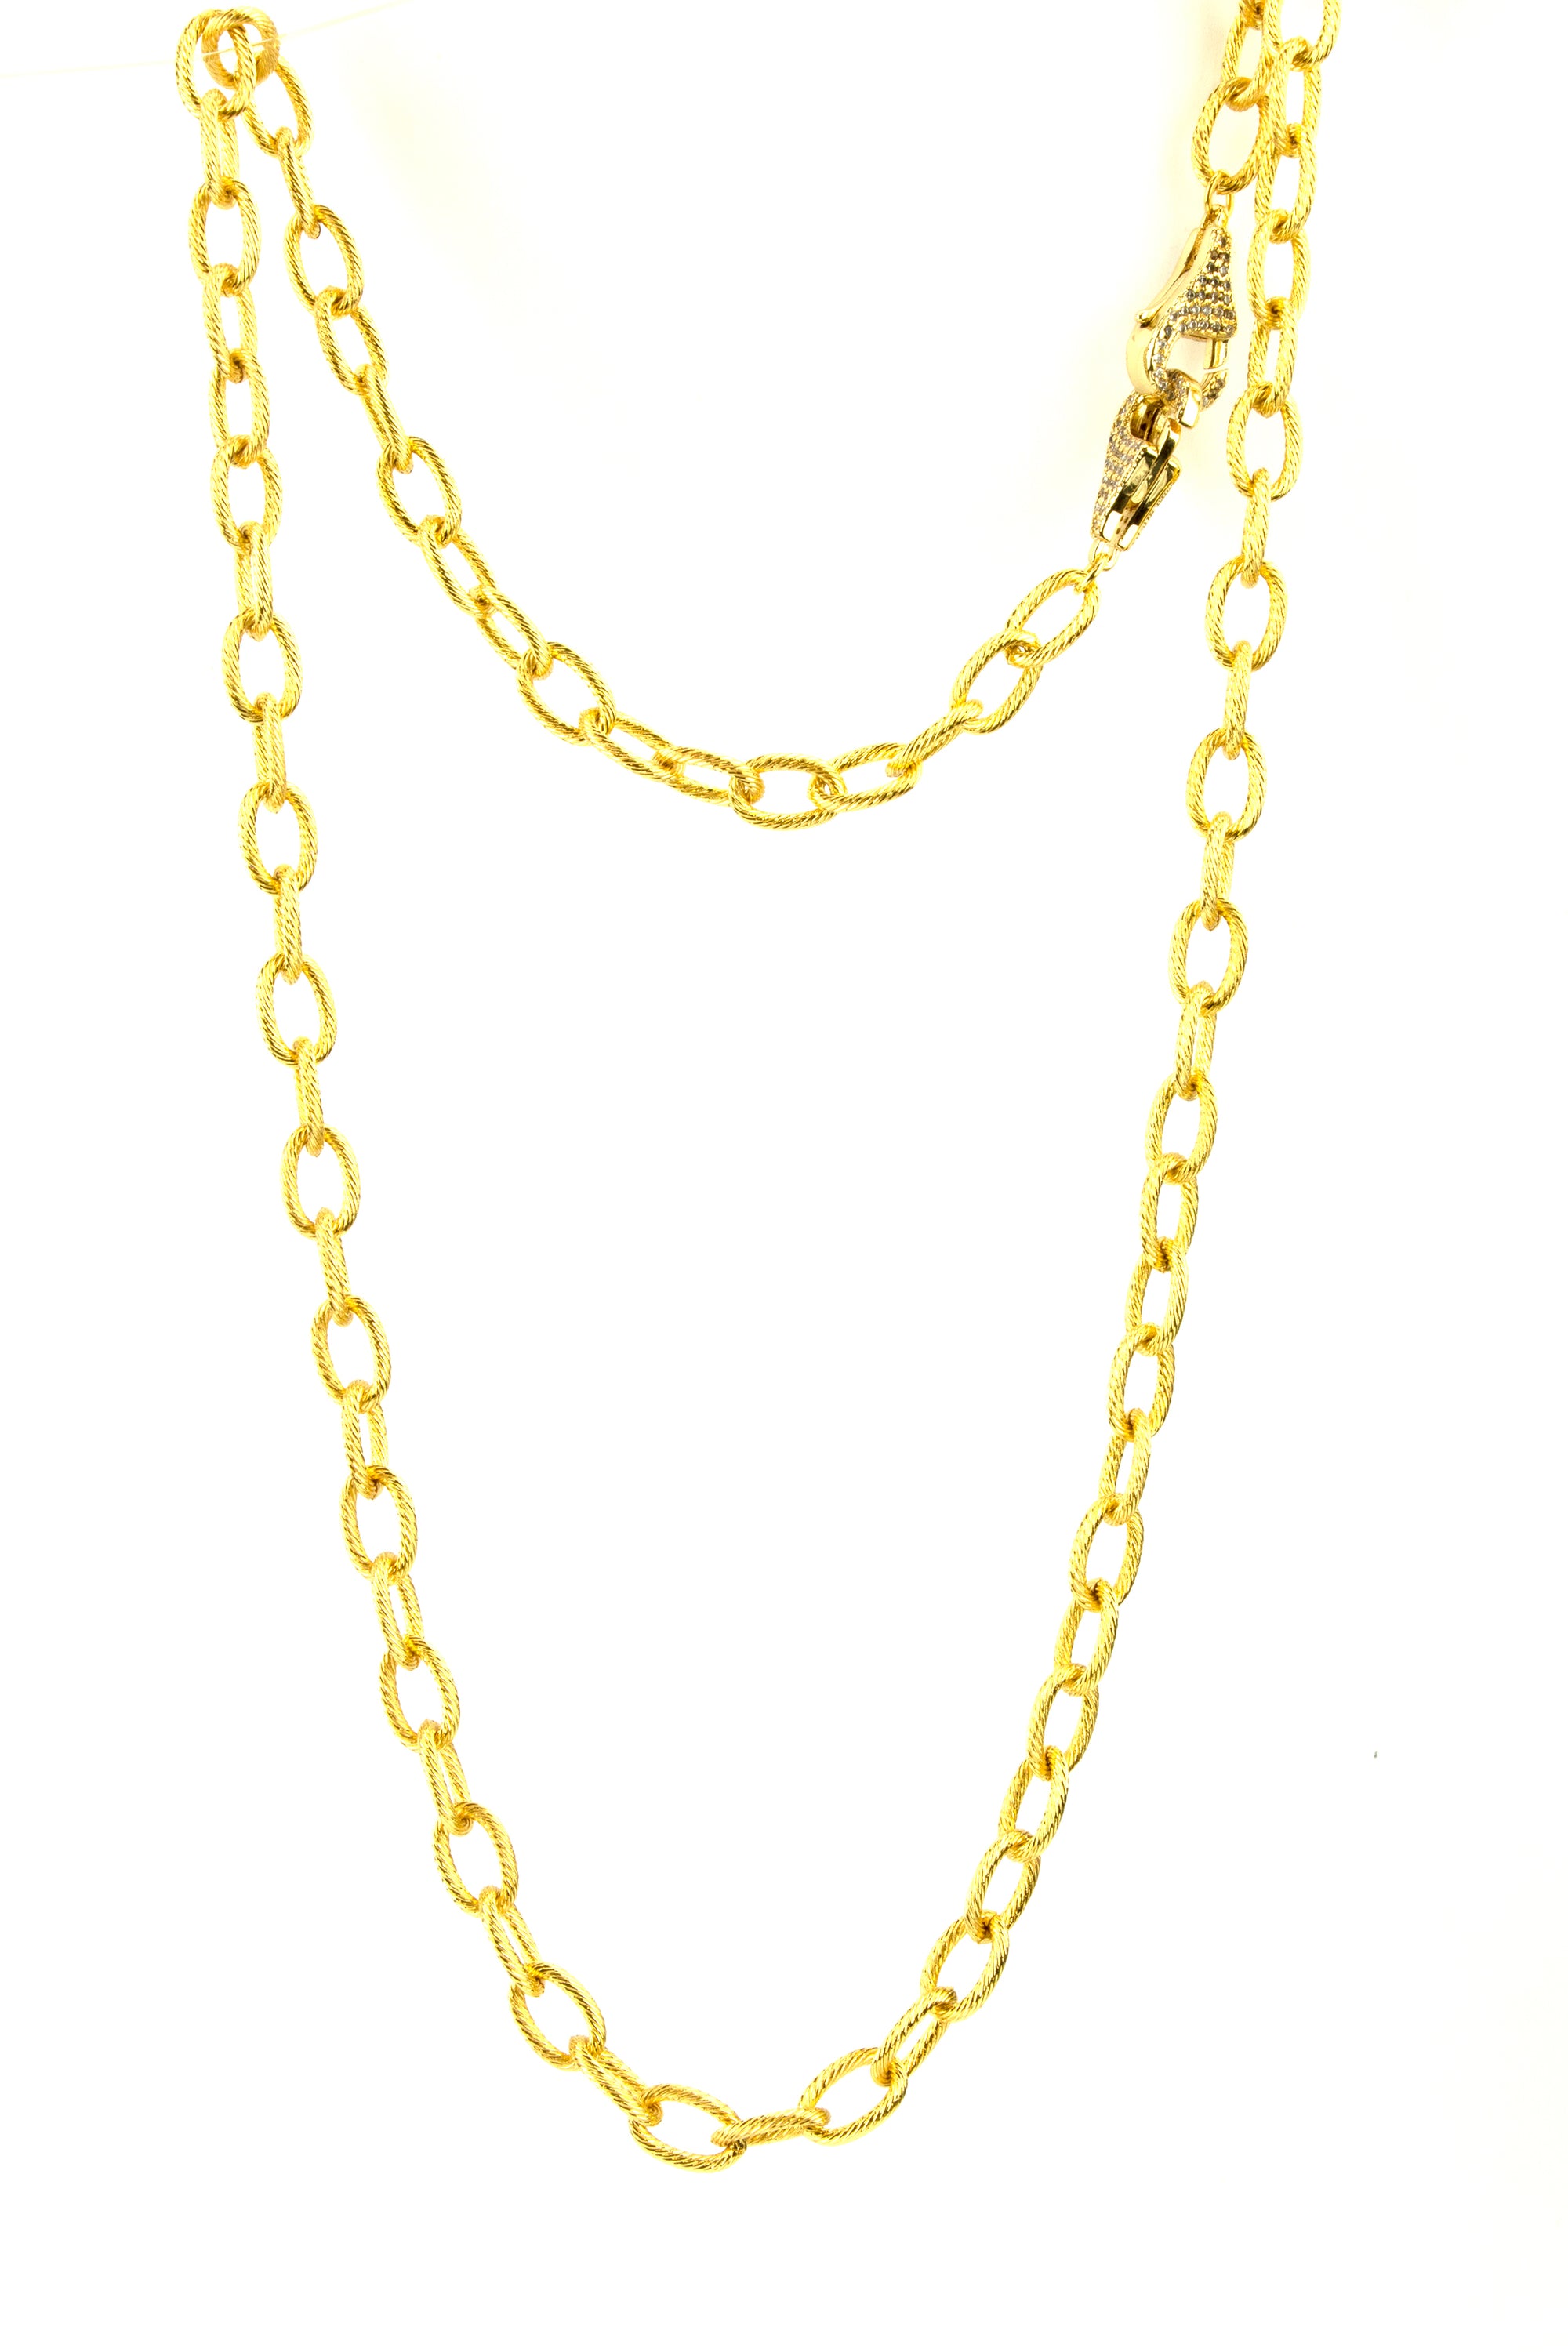 Gold Eyeglass/Mask Chain w/ Pave Clasp